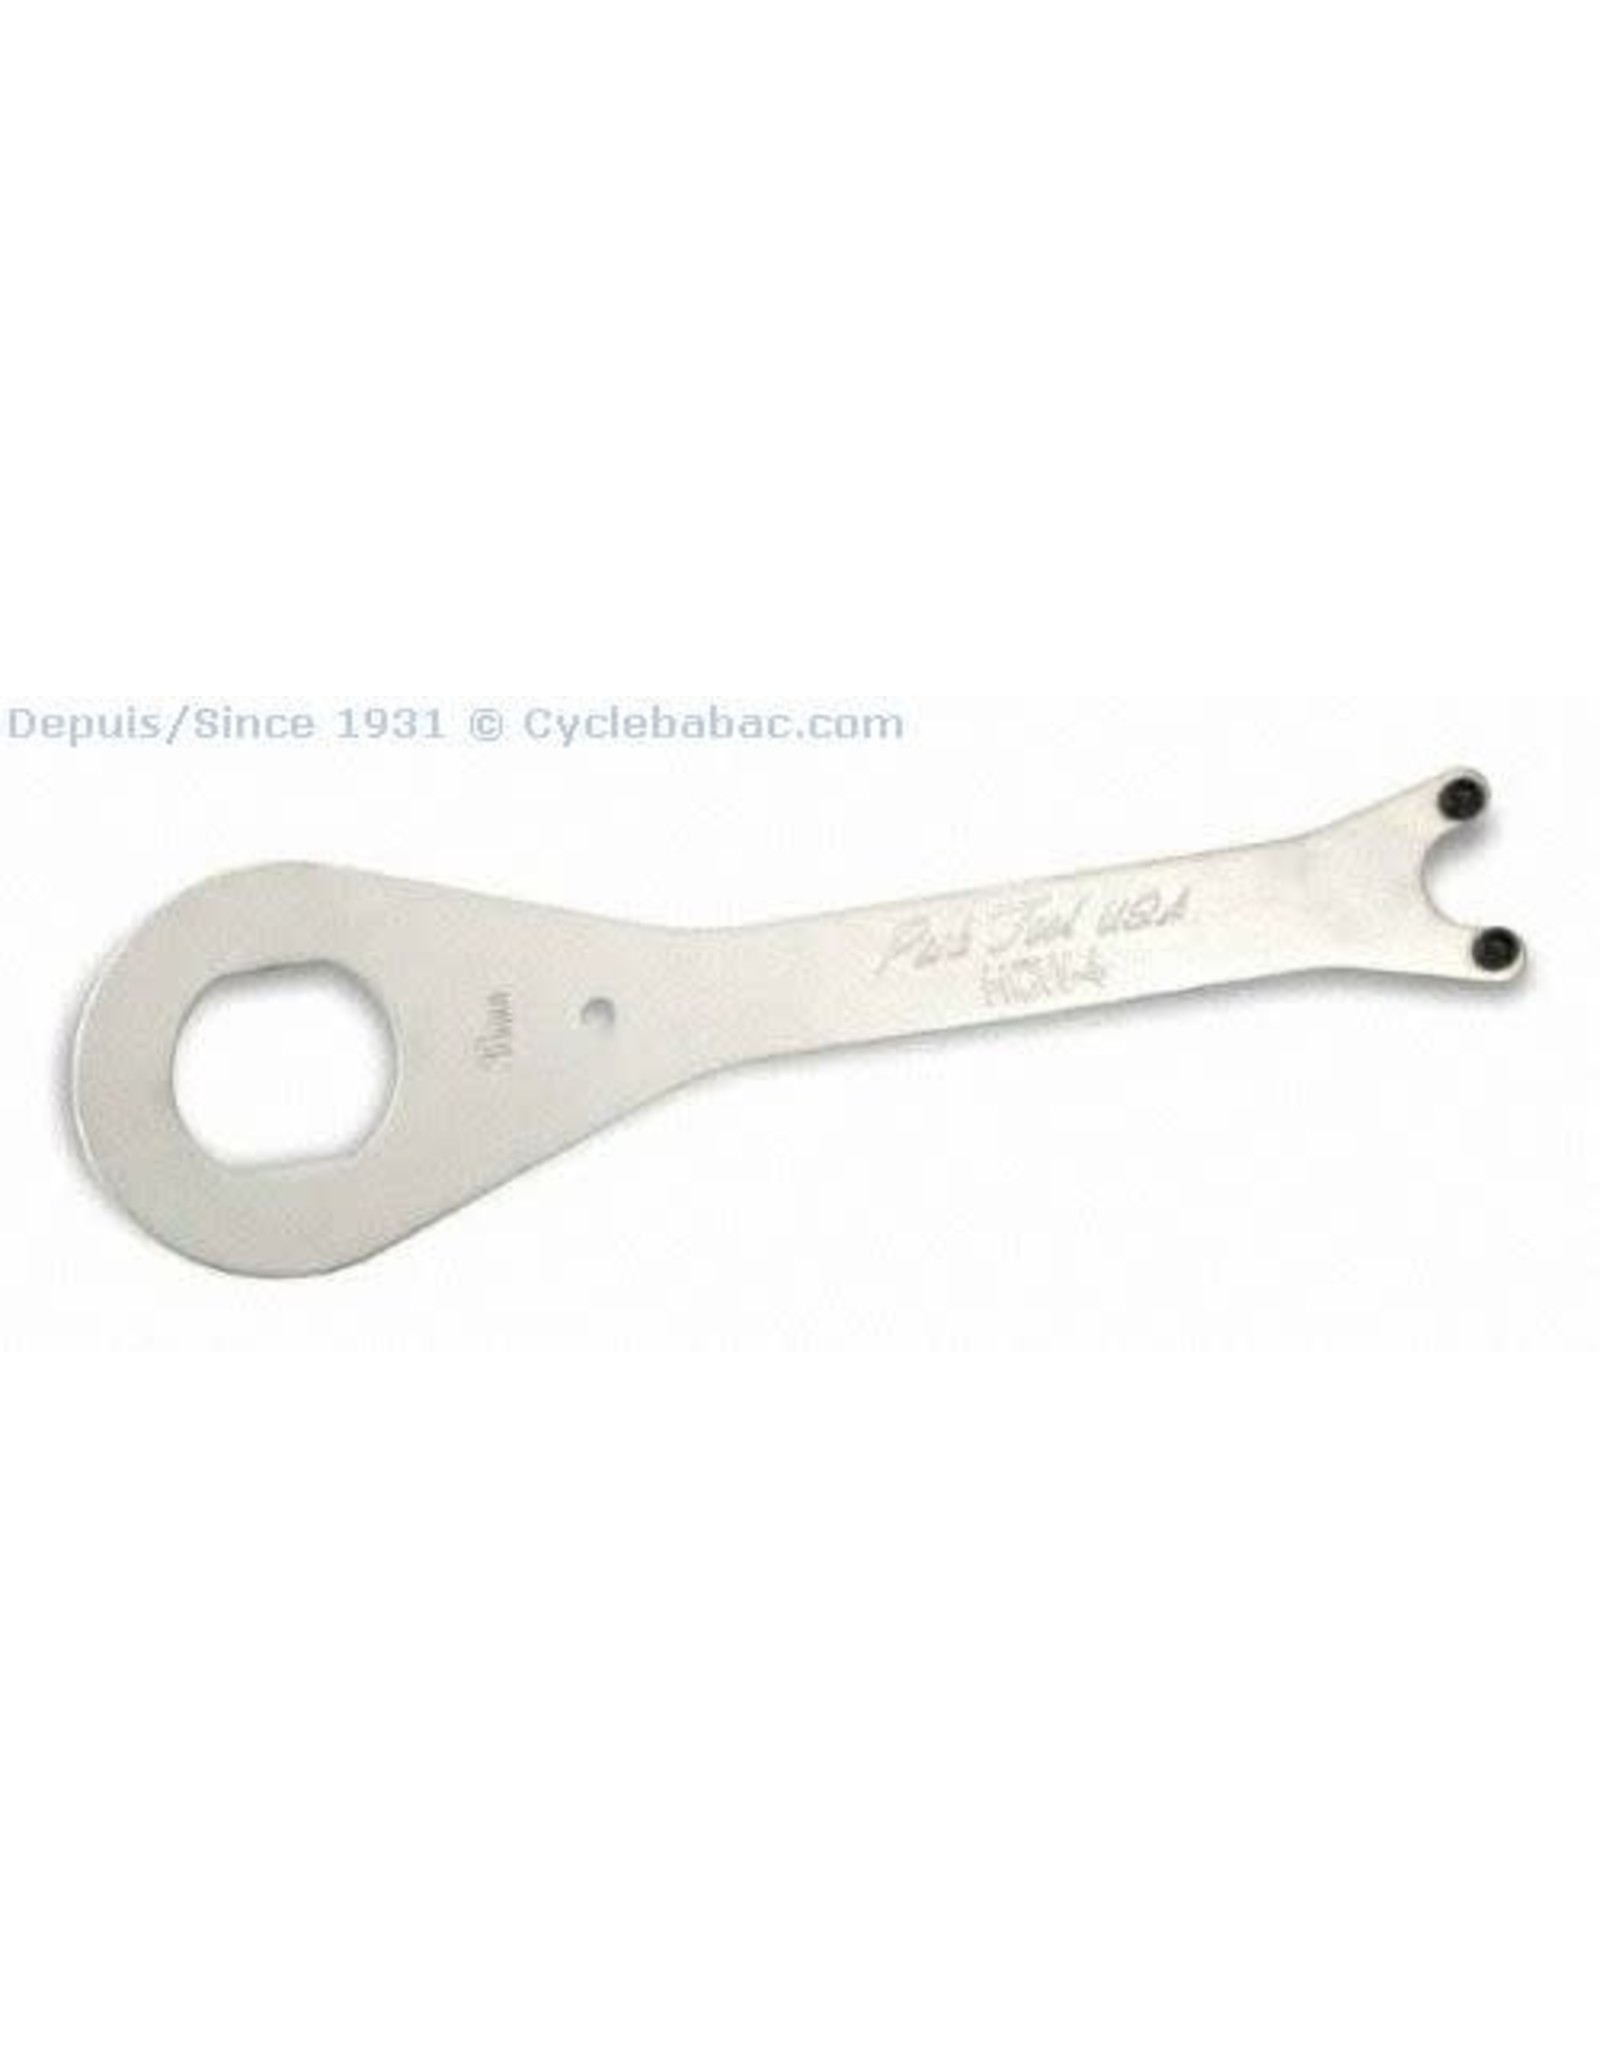 Park tool TS-4 Fixed Cup Wrench